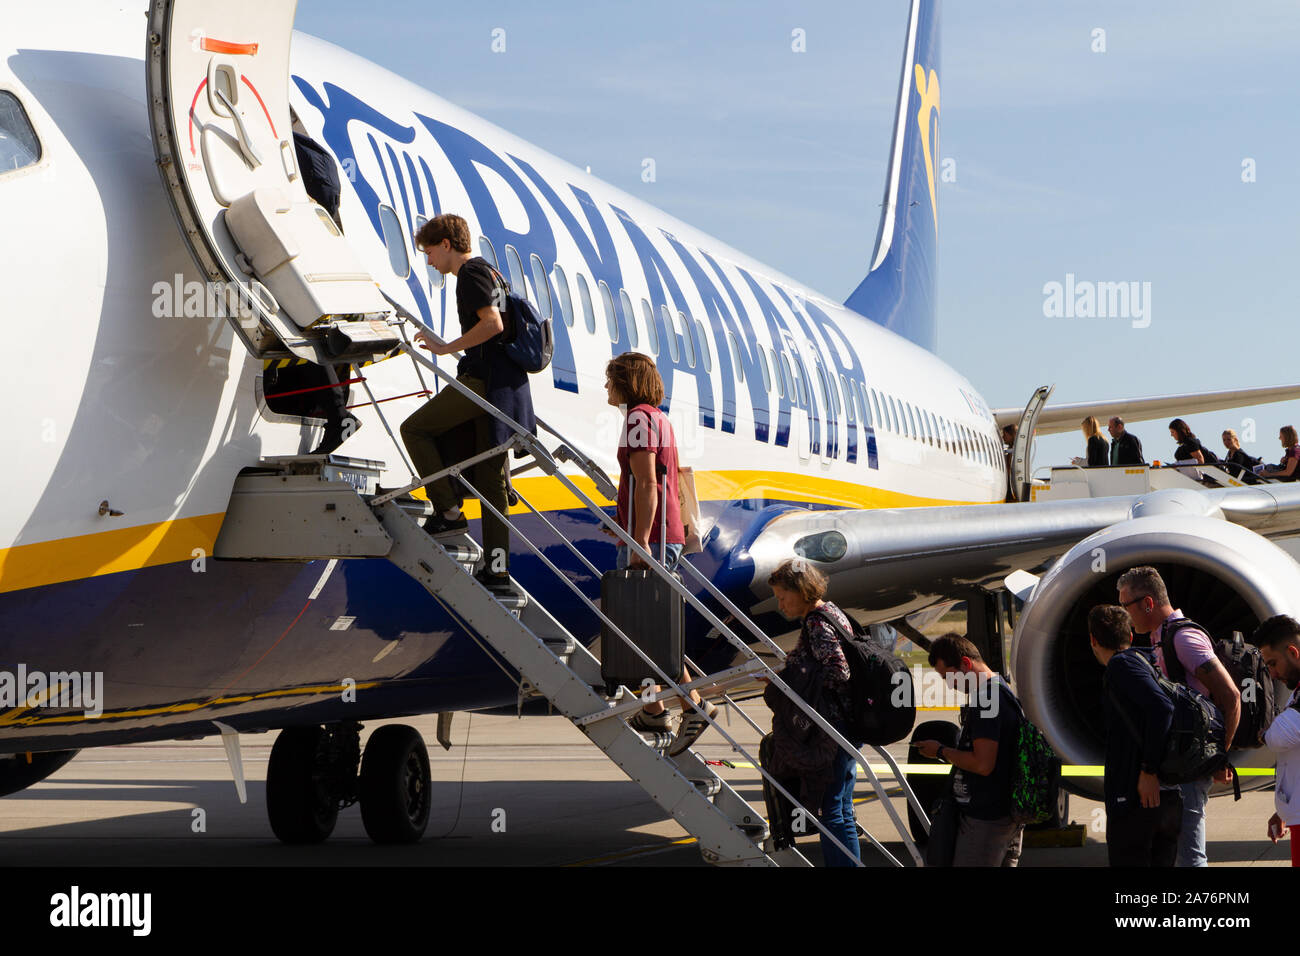 People boarding a Ryanair Boeing 737-800 aircraft at the Charleroi Airport in Belgium. Stock Photo